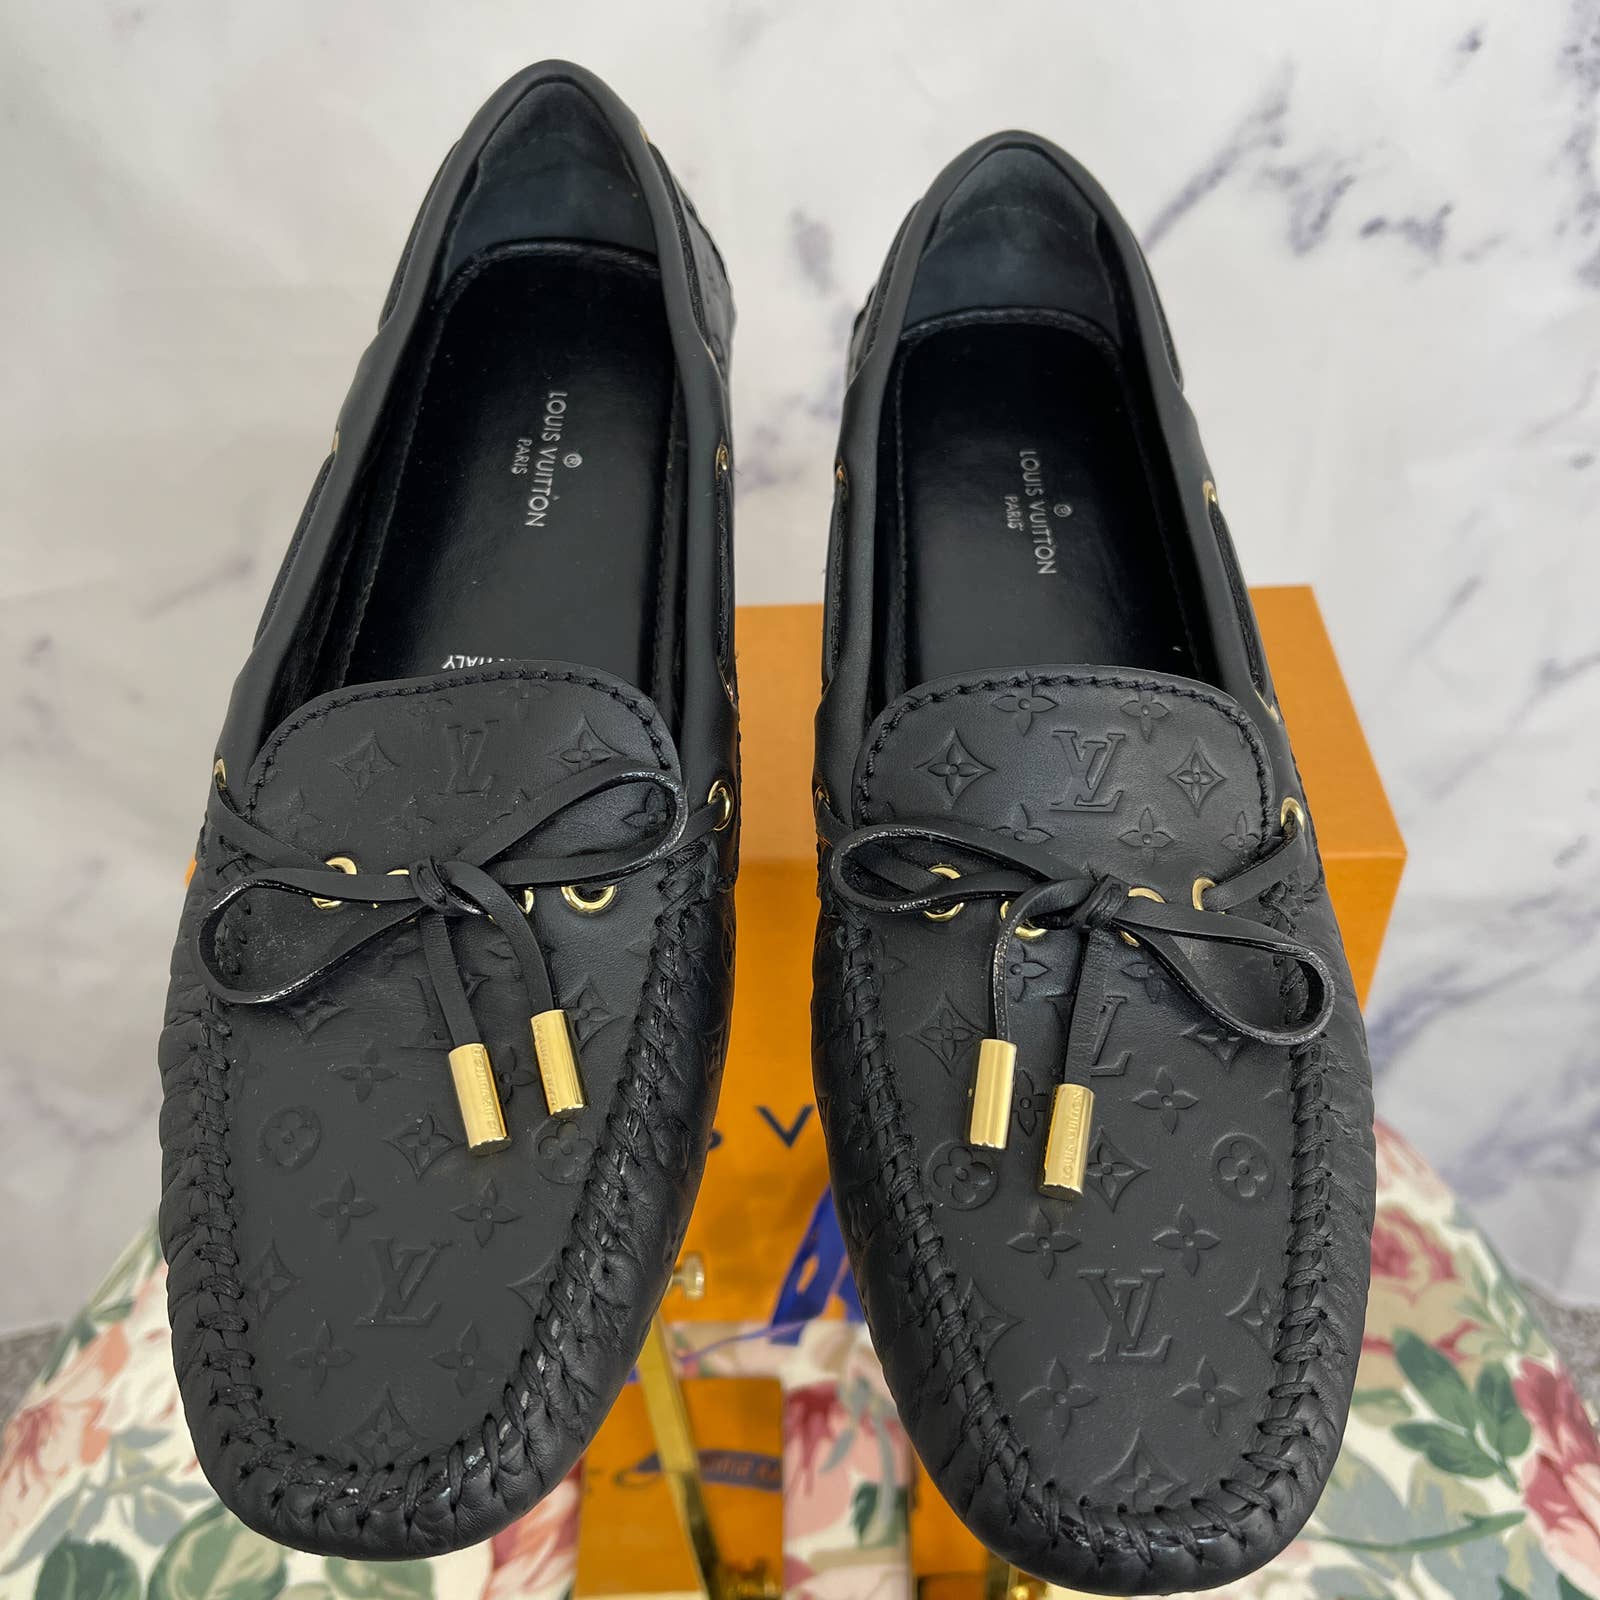 Gloria Flat Loafer - Shoes 1A3QNW